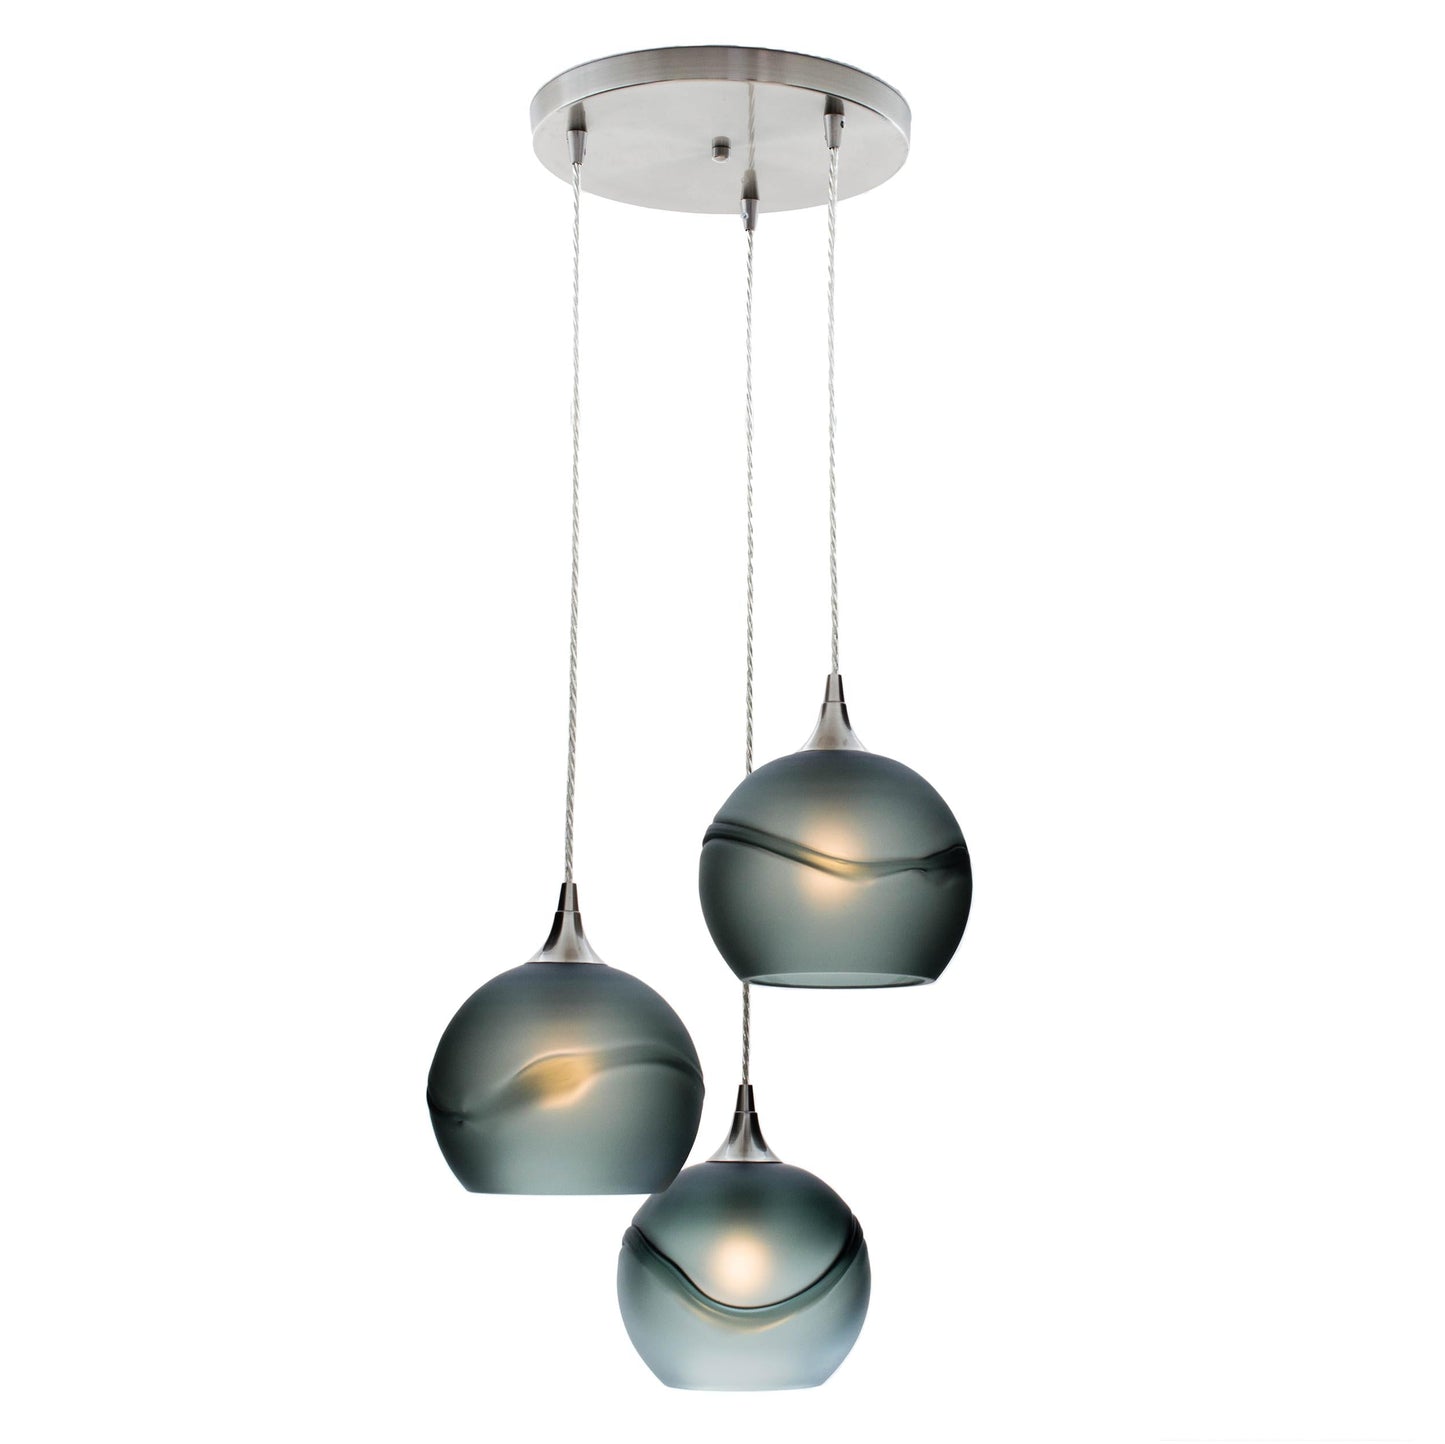 Bicycle Glass Co 767 Glacial: 3 Pendant Cascade Chandelier, Slate Gray Glass, Brushed Nickel Hardware, Light Bulbs On